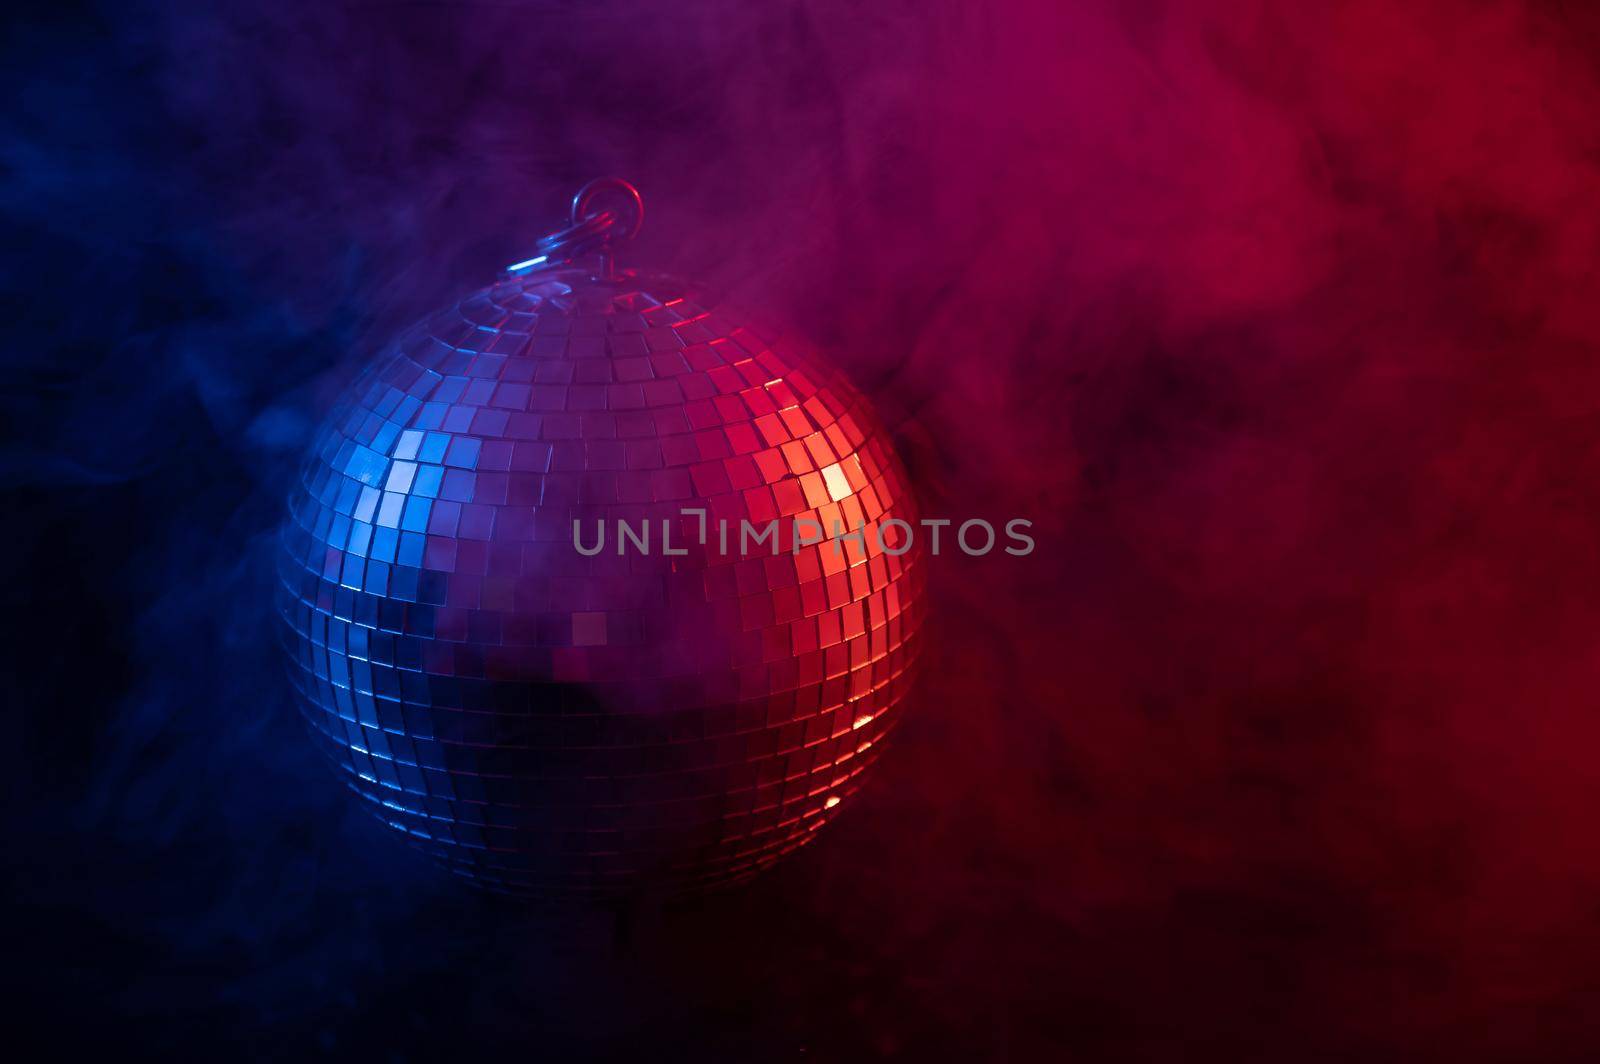 The disco ball is spinning in pink-blue smoke. Night life. by mrwed54